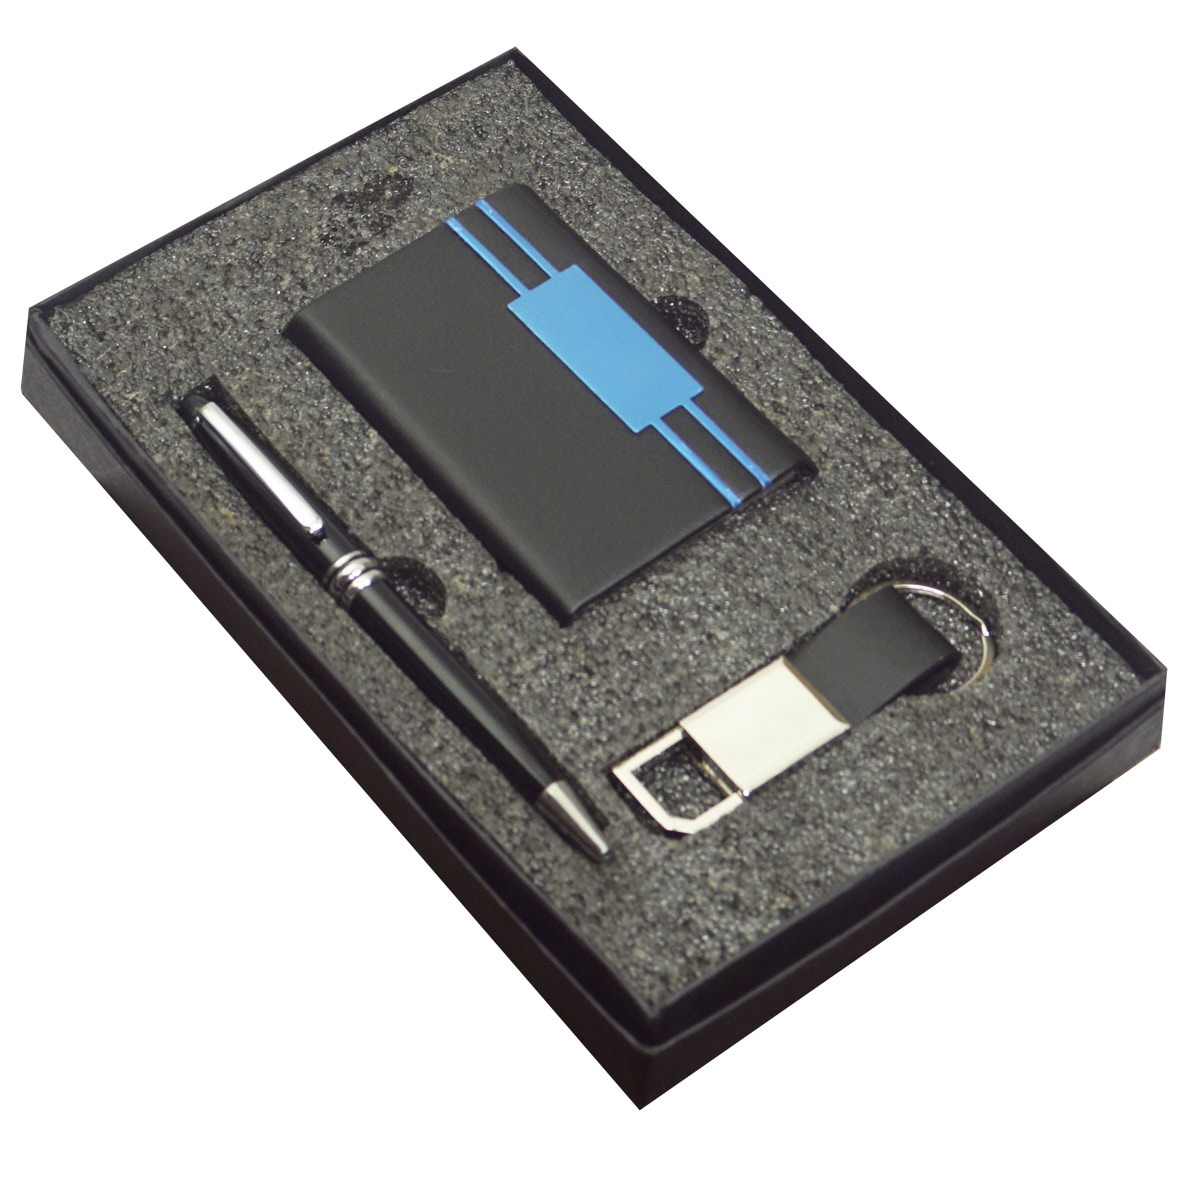 penhouse.in 871 Black Color Ball Pen With Black Cardholder And Leather Keychain 3 in 1Set SKU 23612